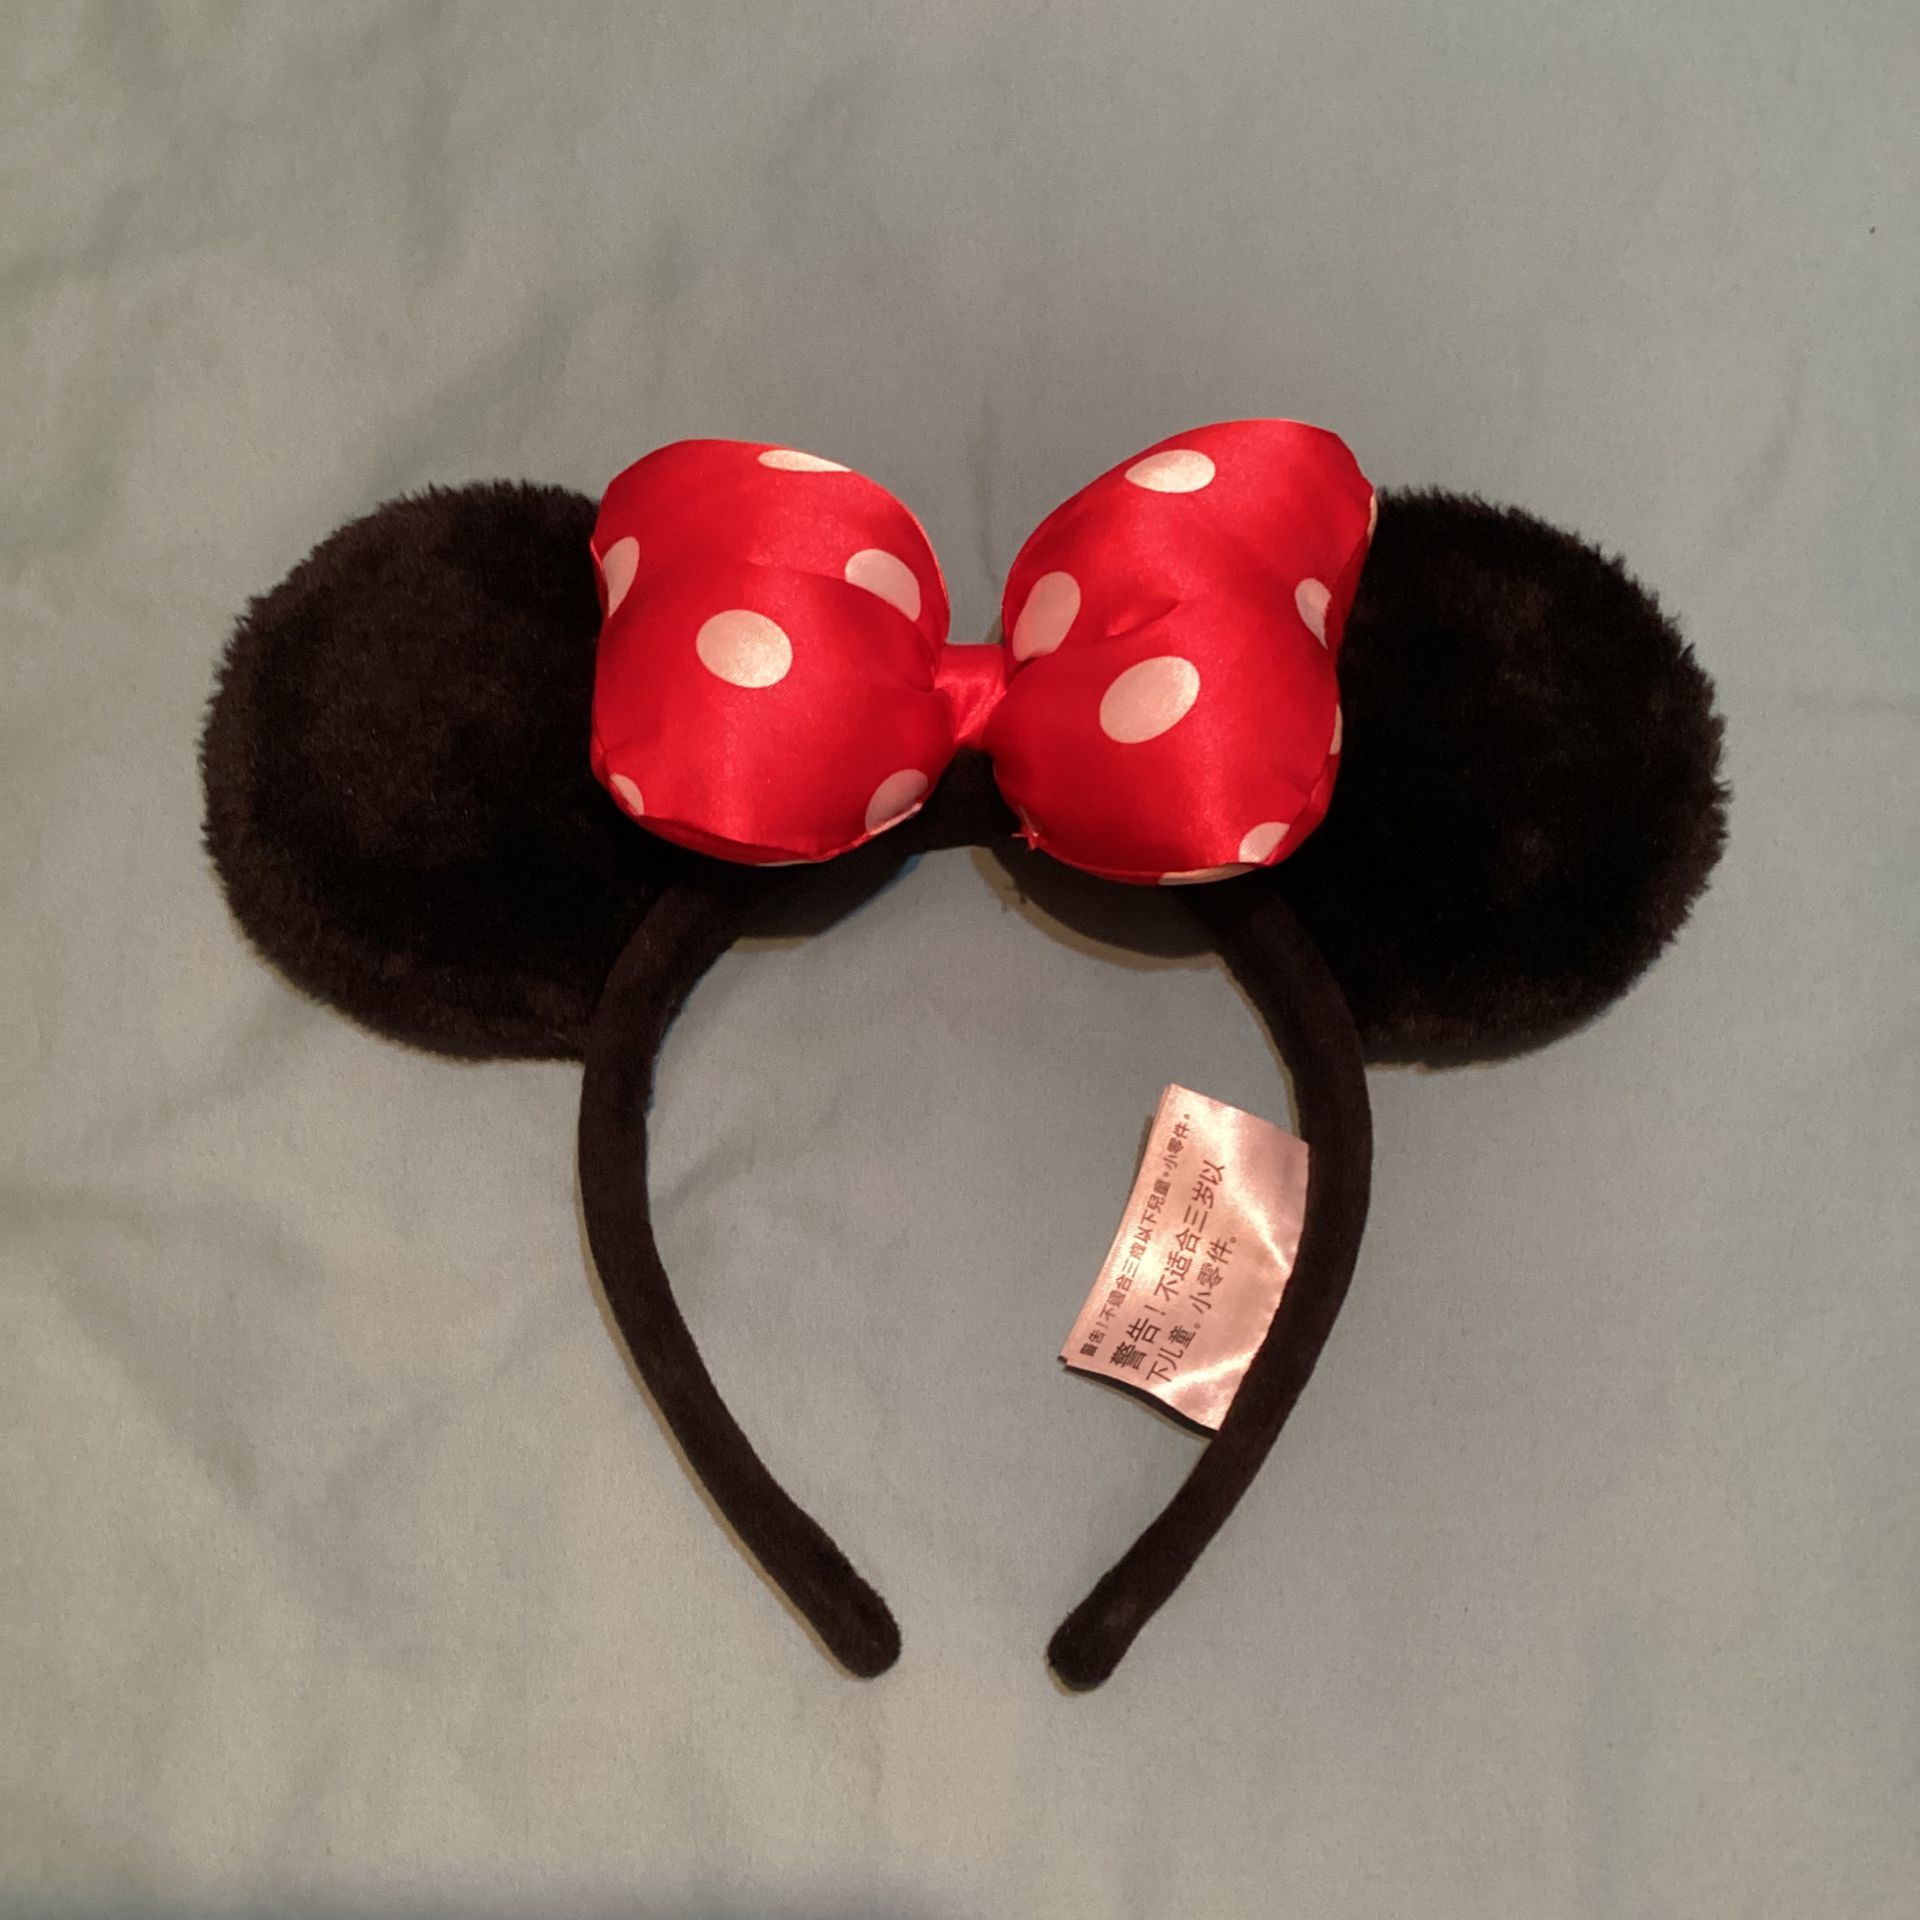 Disney Authentic Minnie Mouse Ears Adult Size 